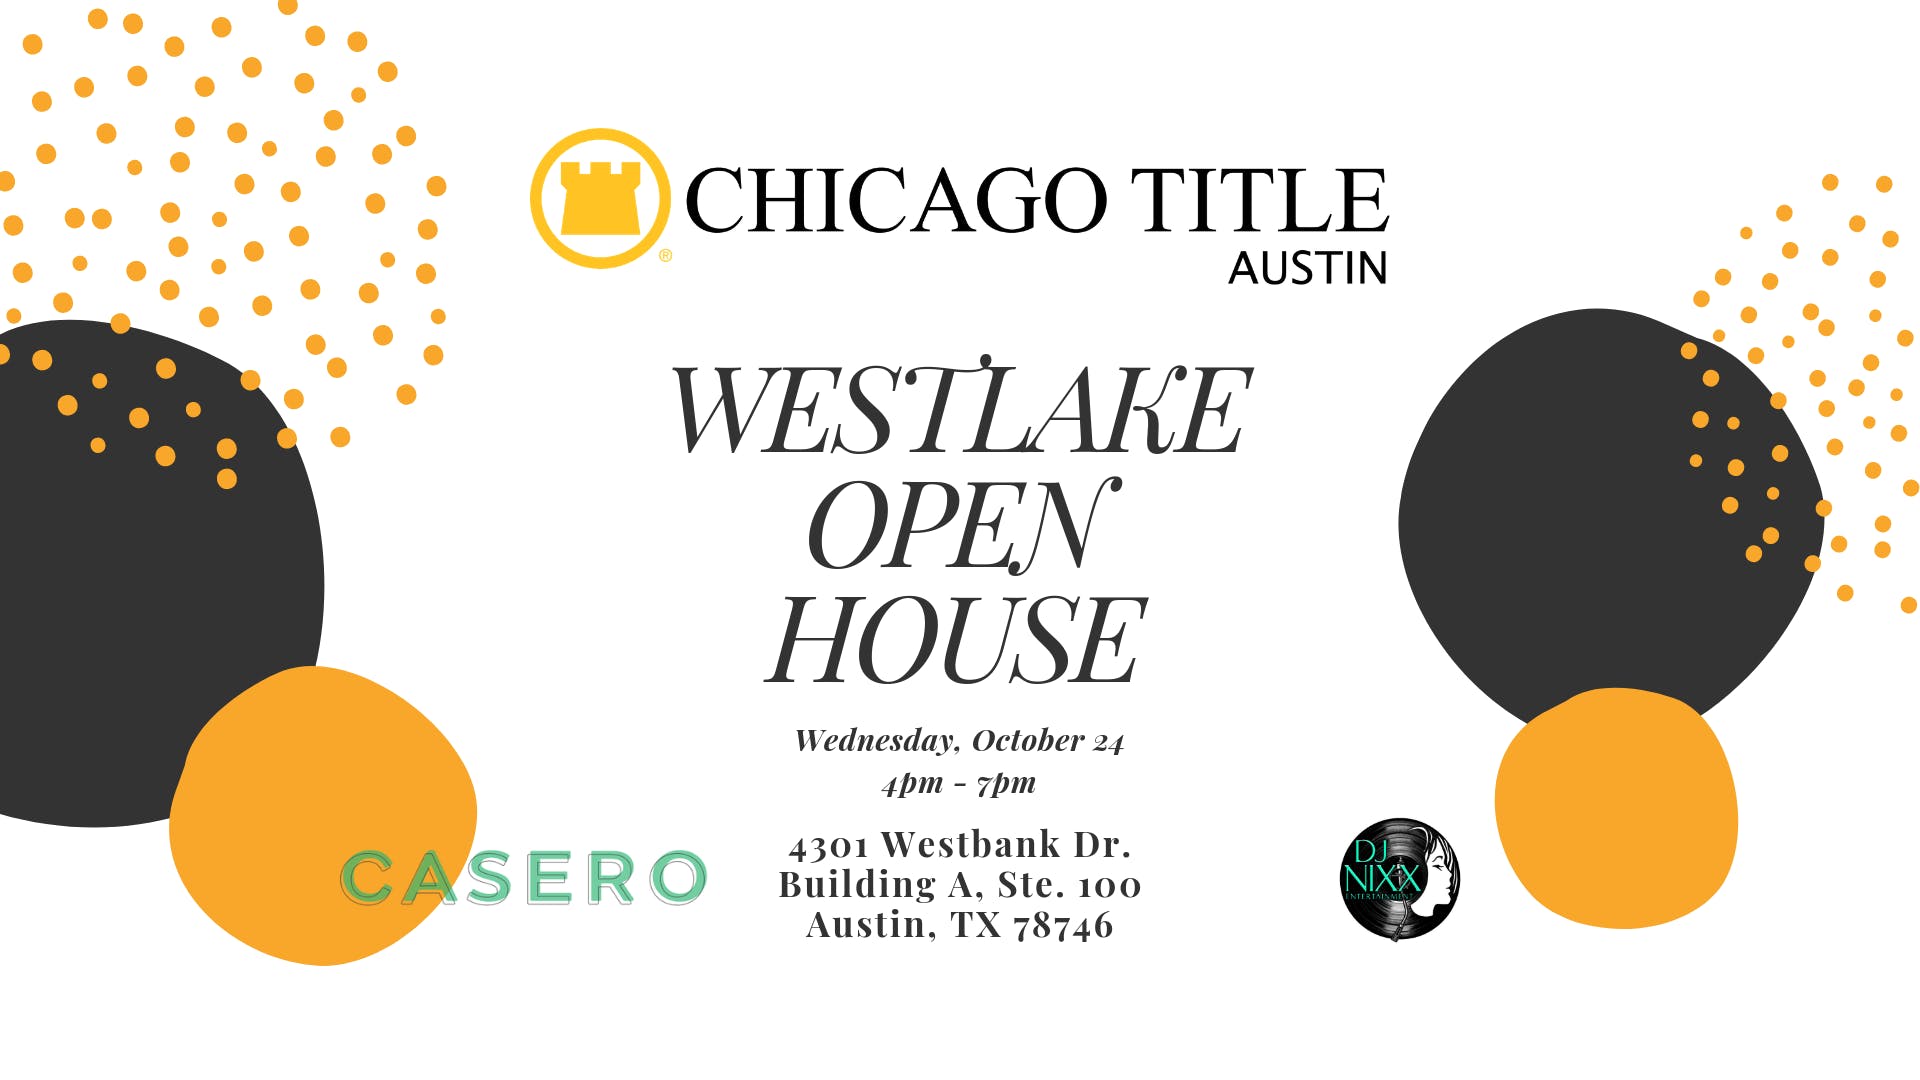 Chicago Title of Texas Logo - Chicago Title Austin Open House OCT 2018